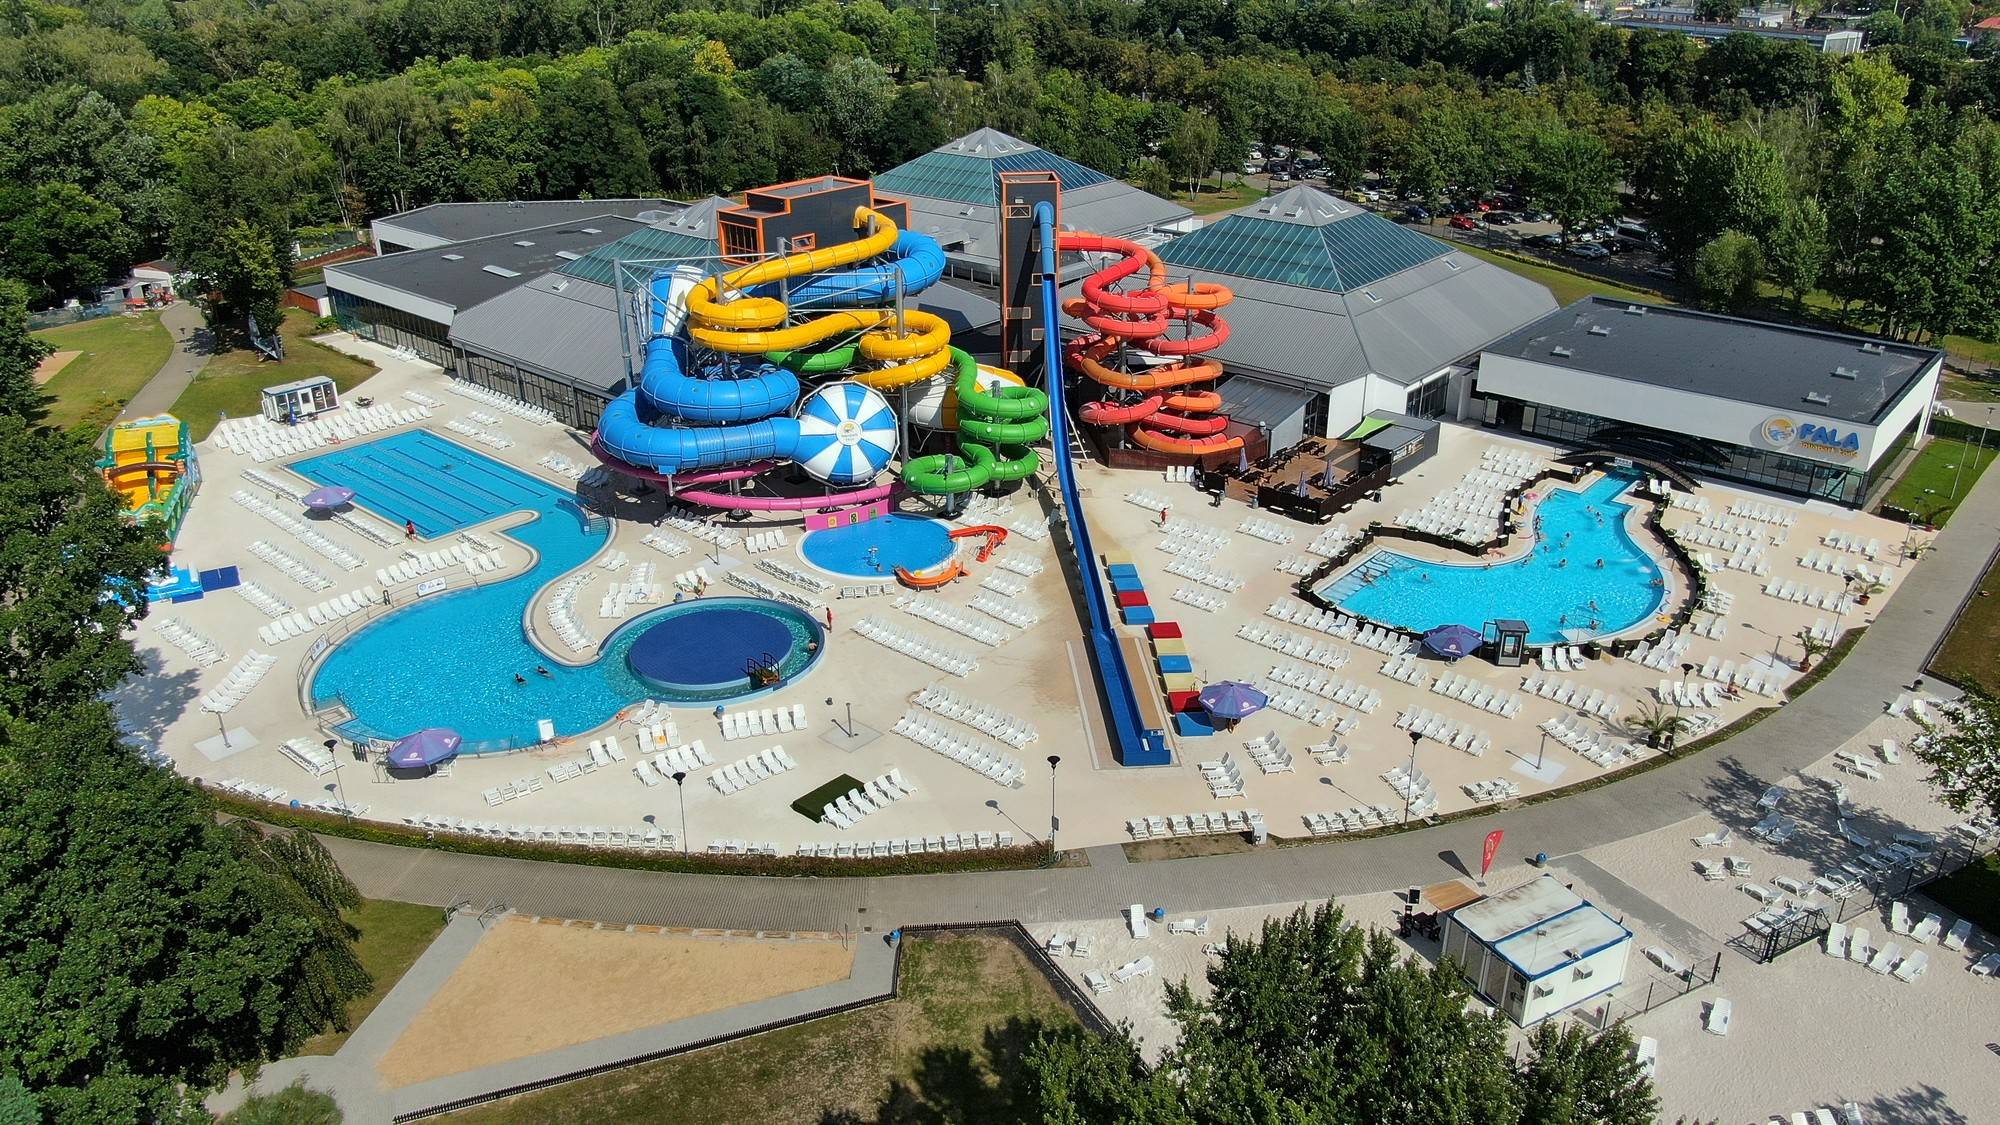 The best water parks in Poland